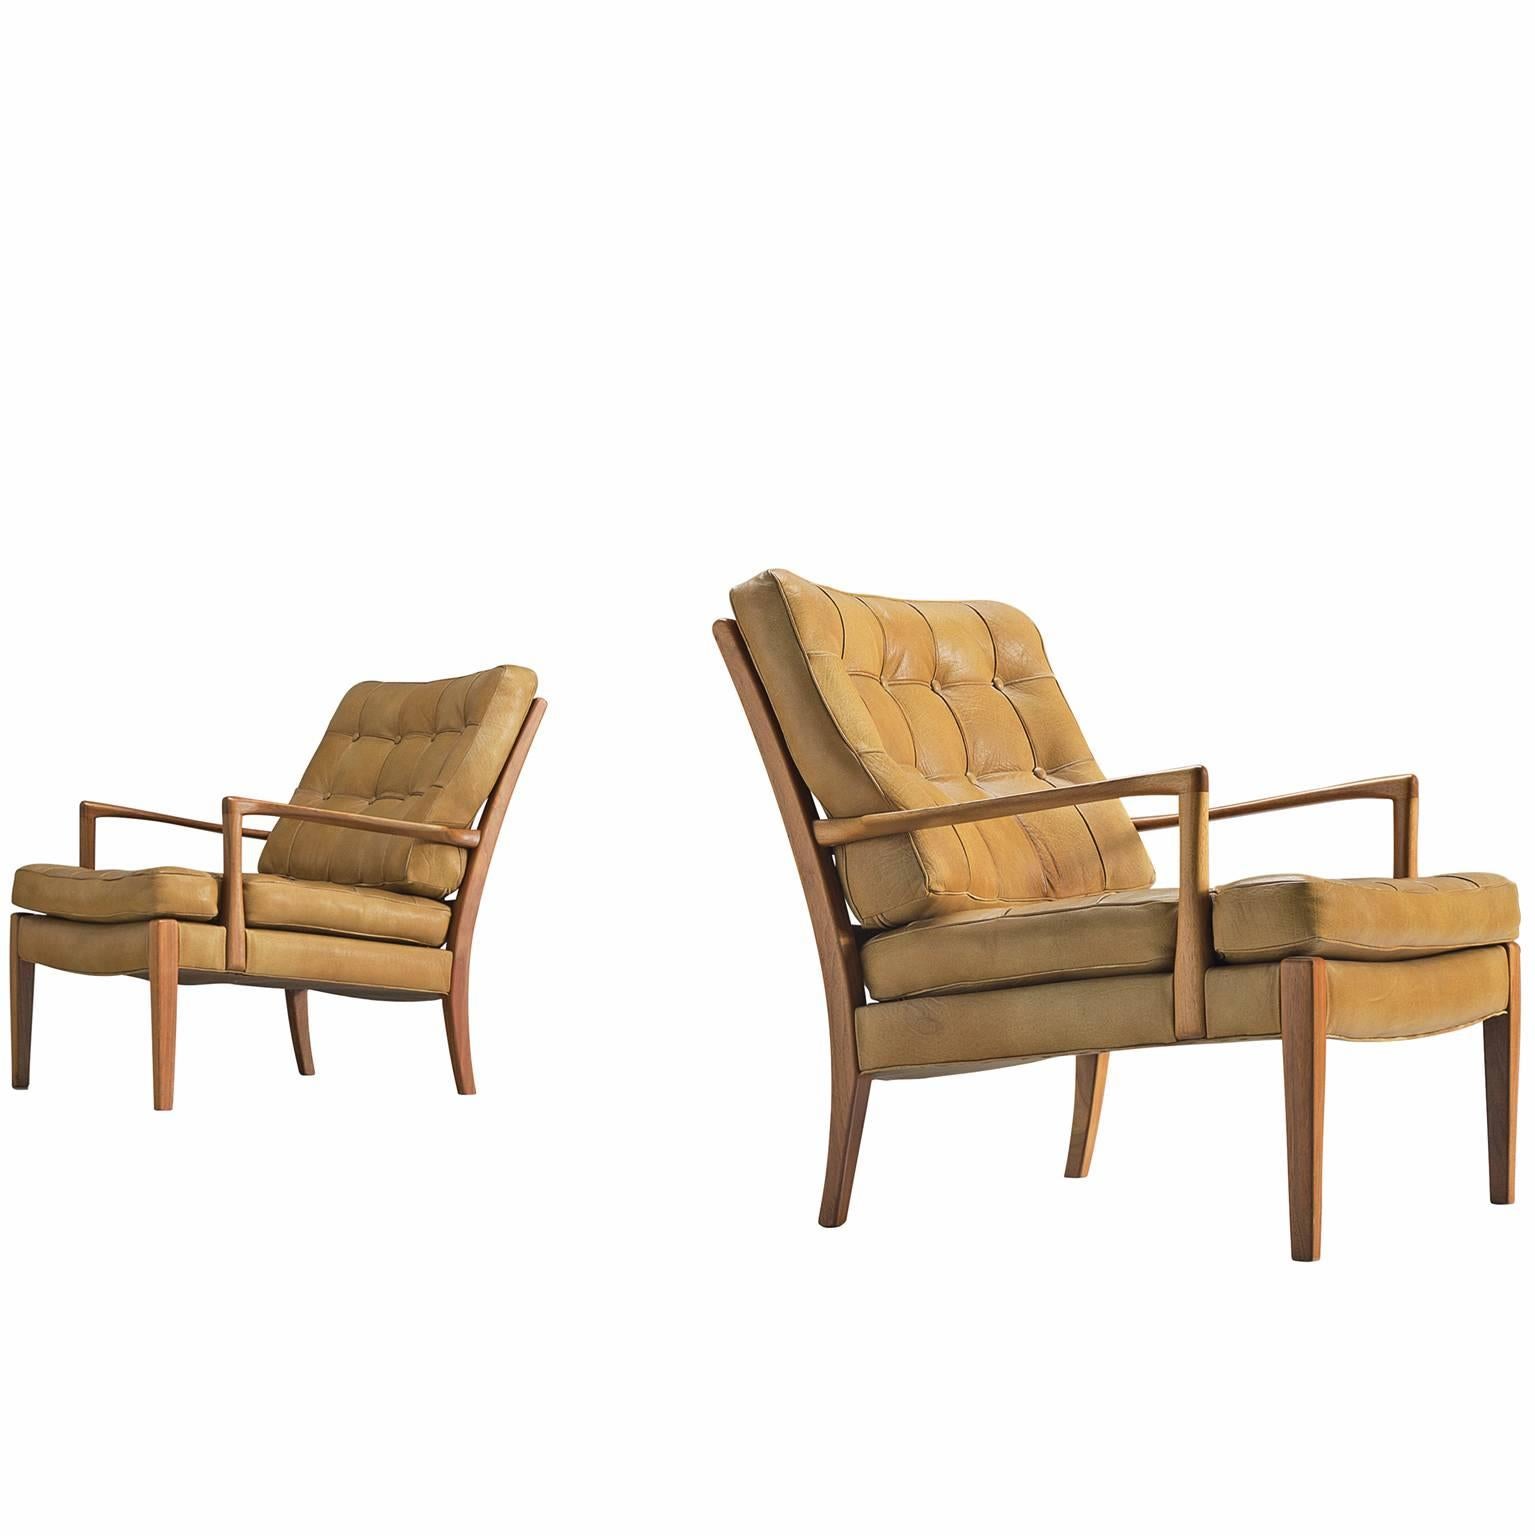 Two Easy Chairs in Cognac Leather and Teak by Arne Norell, Sweden, 1960